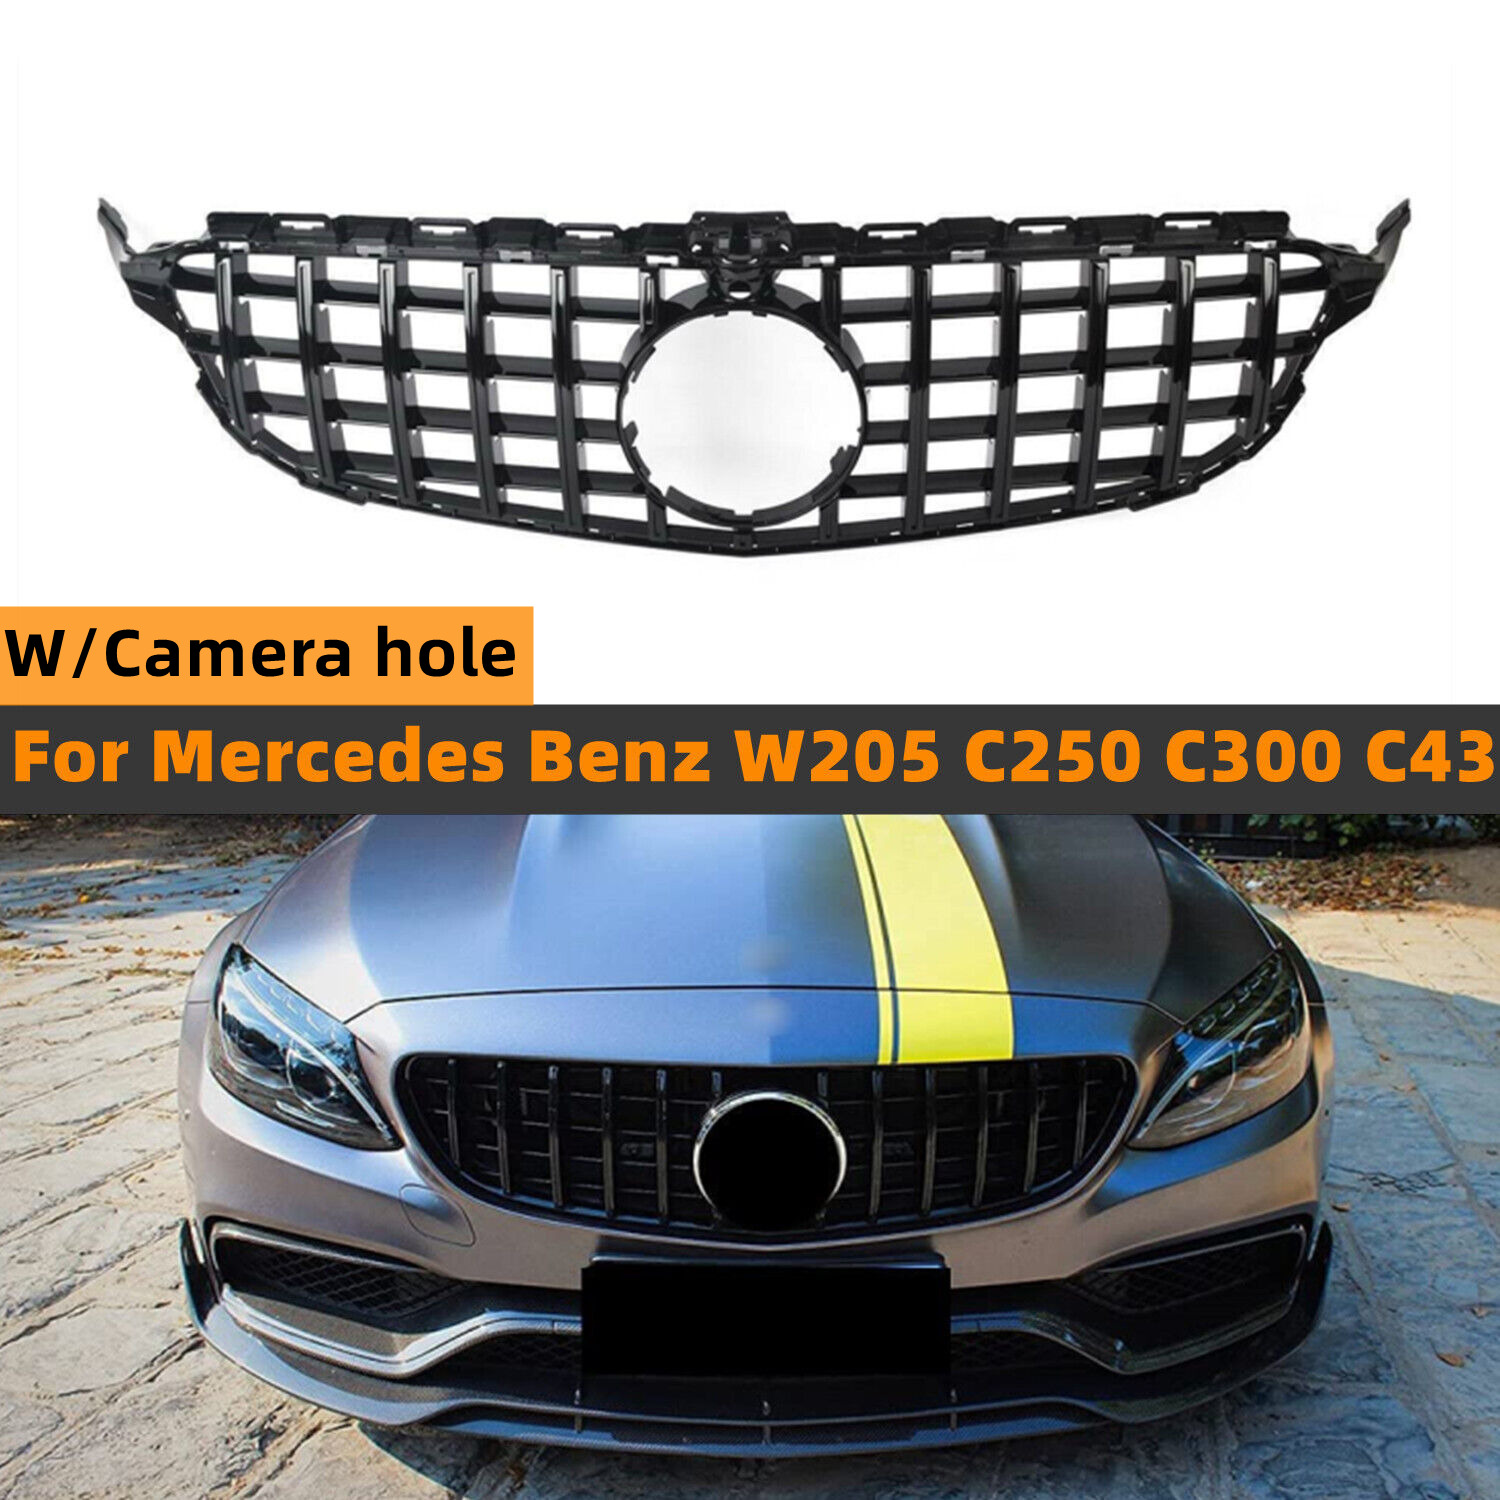 AMG GT R Front Grill Grille For Mercedes-Benz W205 C250 C300 15-18 W/Camera Hole